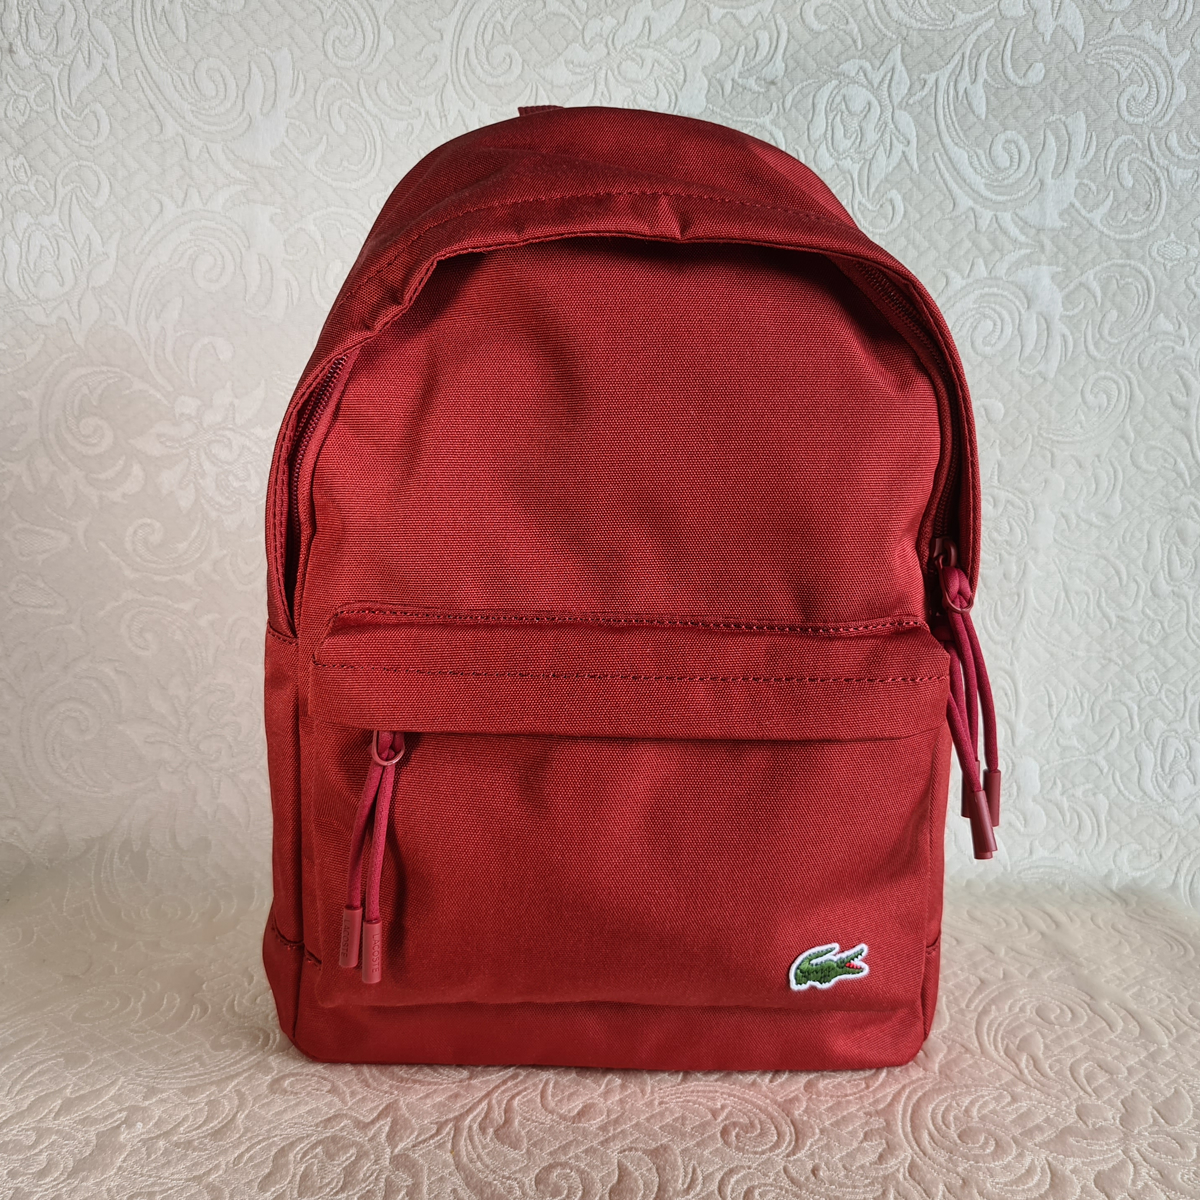 lacoste backpack price philippines